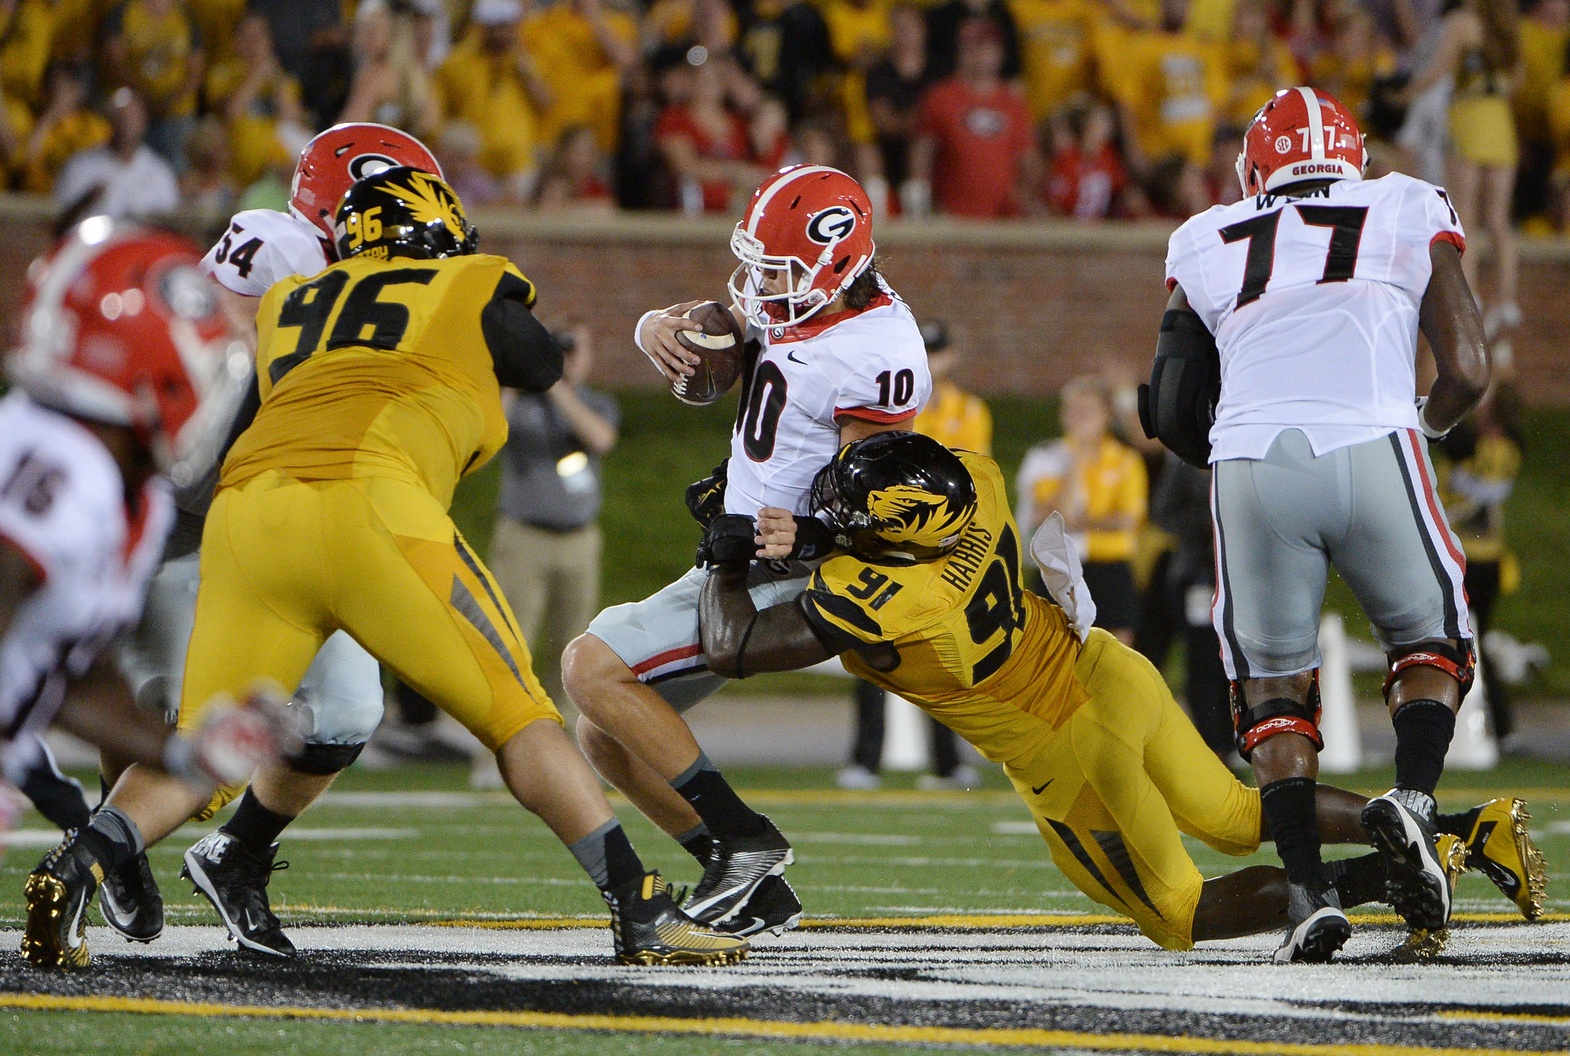 Sep 17, 2016; Columbia, MO, USA; Georgia Bulldogs quarterback Jacob Eason (10) is sacked by Missouri Tigers defensive end Charles Harris (91) in the first half at Faurot Field. Mandatory Credit: John Rieger-USA TODAY Sports